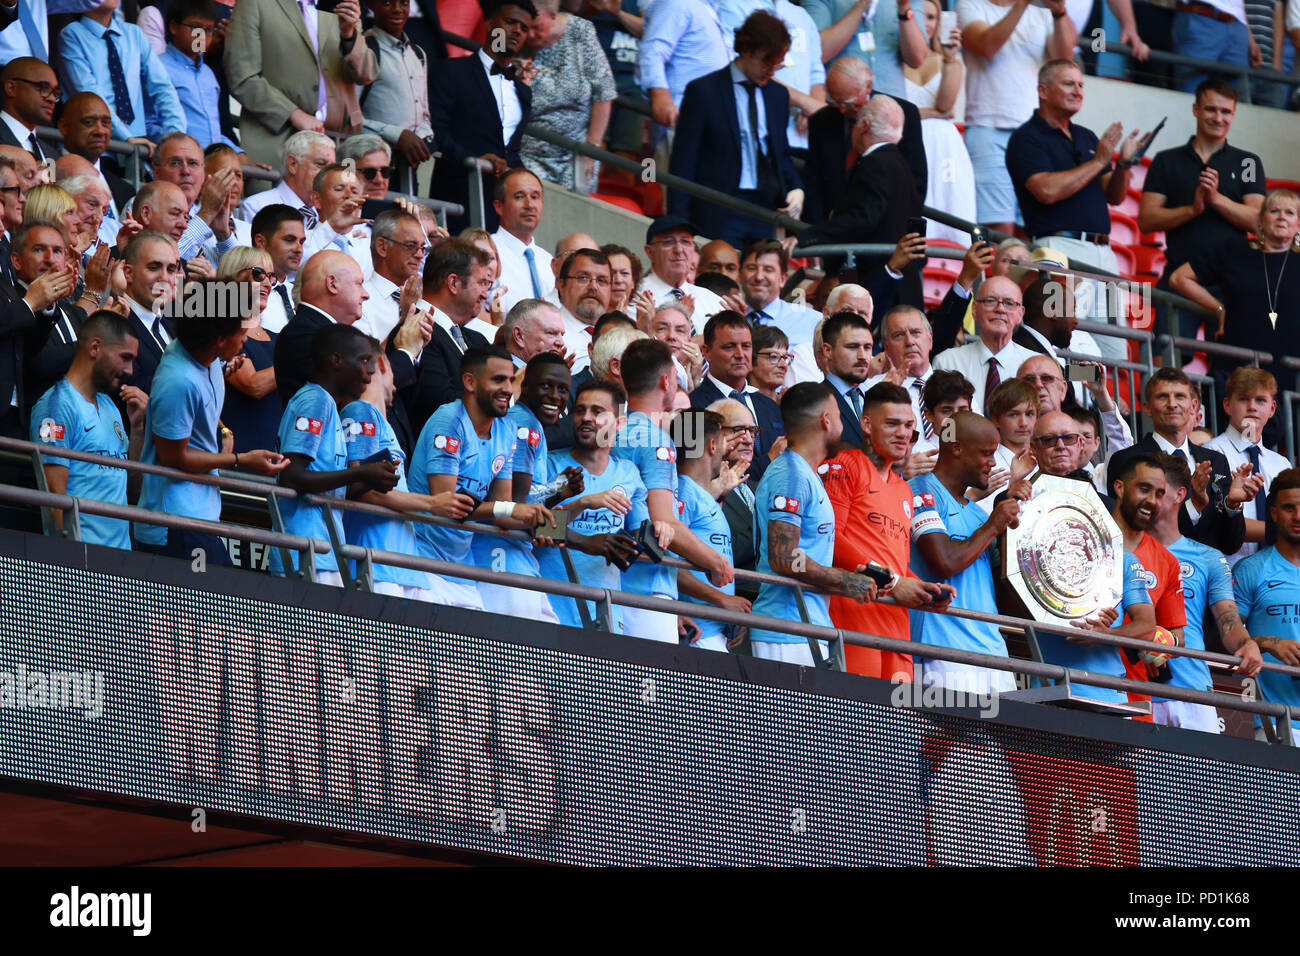 London, UK. 5th August 2018. The FA Community Shield between Chelsea FC and Manchester City FC, at Wembley Stadium August 5, 2018 Credit: Paul Marriott/Alamy Live News Stock Photo